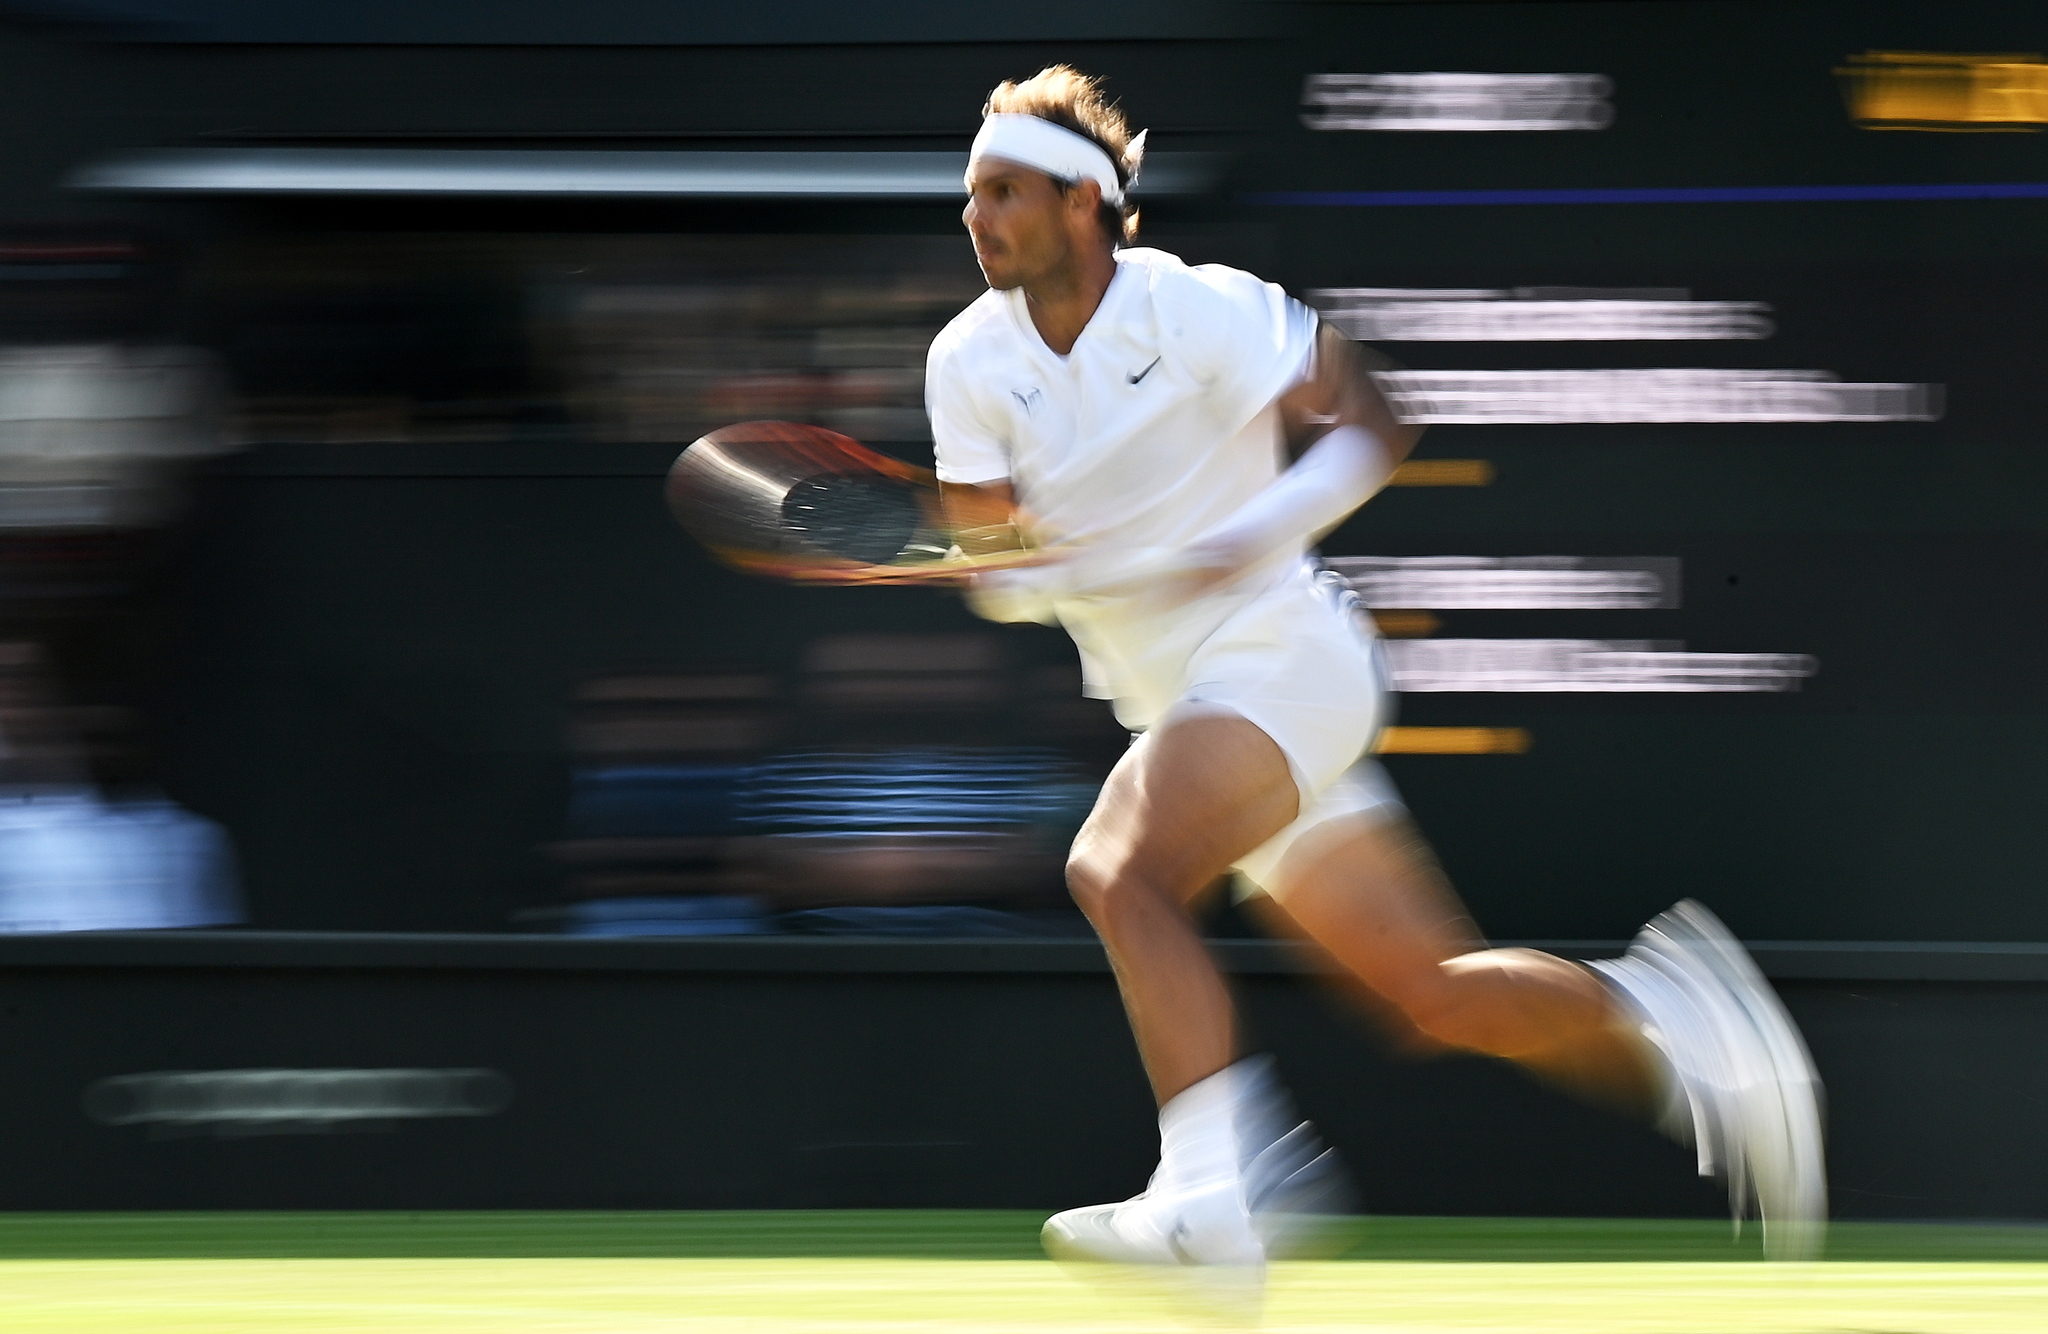 Wimbledon (United Kingdom), 30/06/2022.- Rafael  lt;HIT gt;Nadal lt;/HIT gt; of Spain in action in the men's second round match against Ricardas Berankis of Lithuania at the Wimbledon Championships, in Wimbledon, Britain, 30 June 2022. (Tenis, Lituania, España, Reino Unido) EFE/EPA/NEIL HALL EDITORIAL USE ONLY